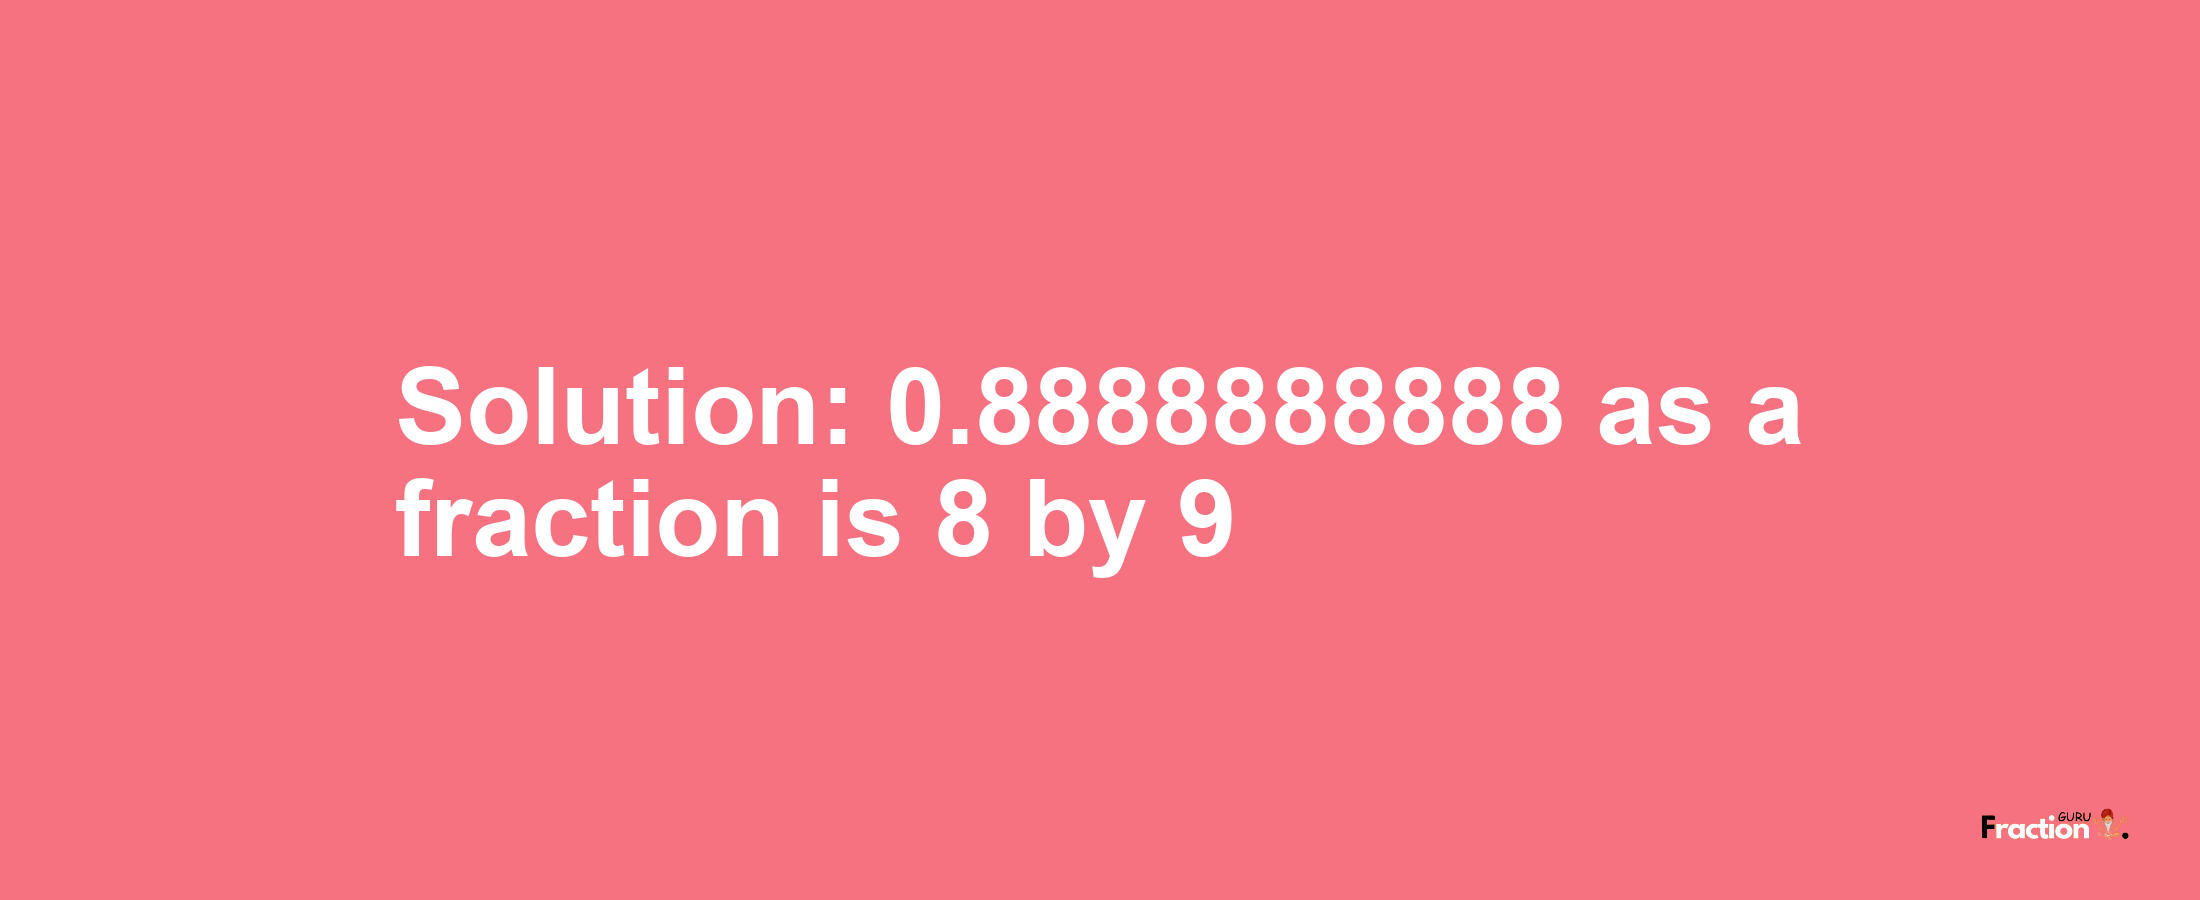 Solution:0.8888888888 as a fraction is 8/9